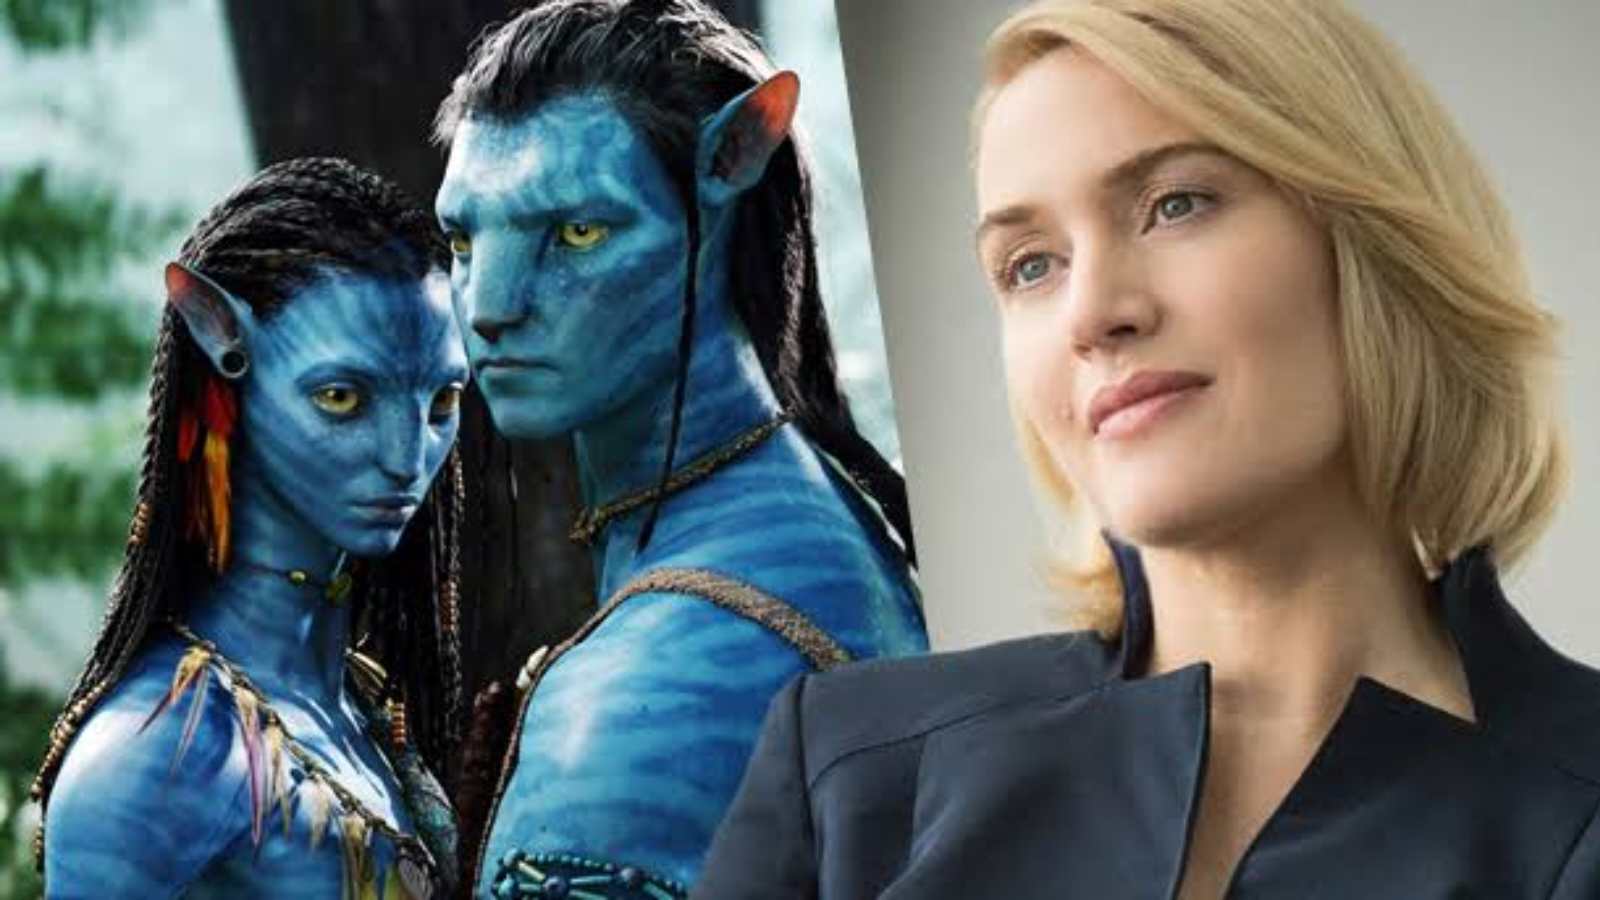 Kate Winslet Lately on Twitter Avatar 2 is set to be released by  December 2021 entitled Avatar The Way Of Water Kate Winslet is joining  in playing the role of Ronal a